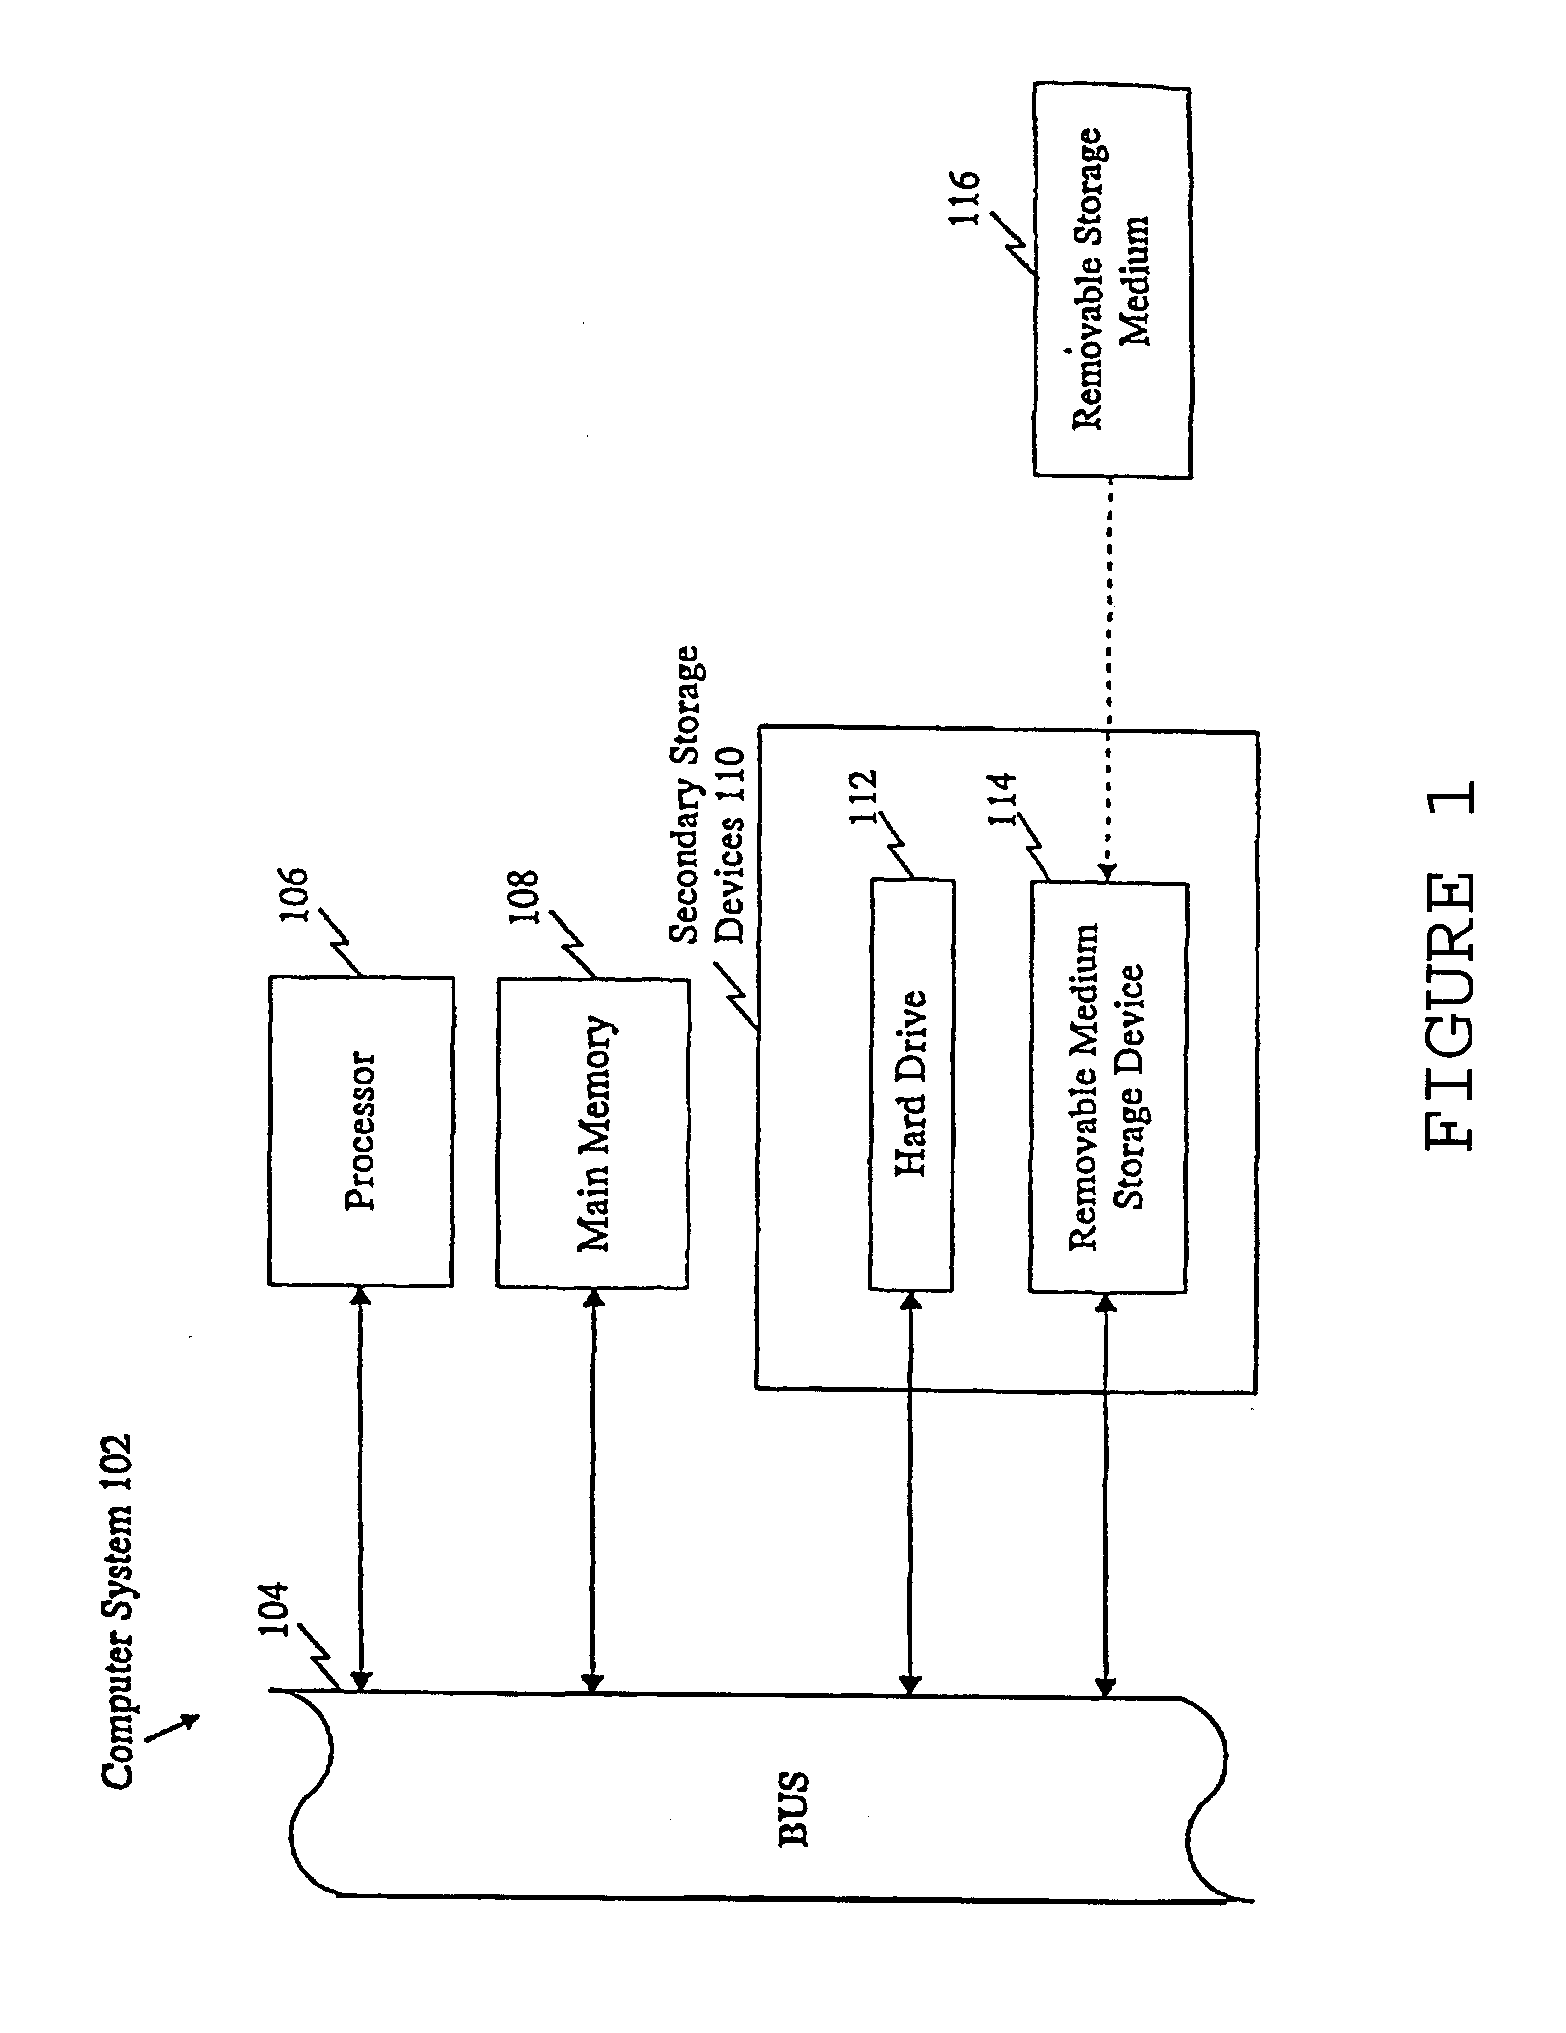 Genetic polymorphisms associated with cardiovascular disorders and drug response, methods of detection and uses thereof